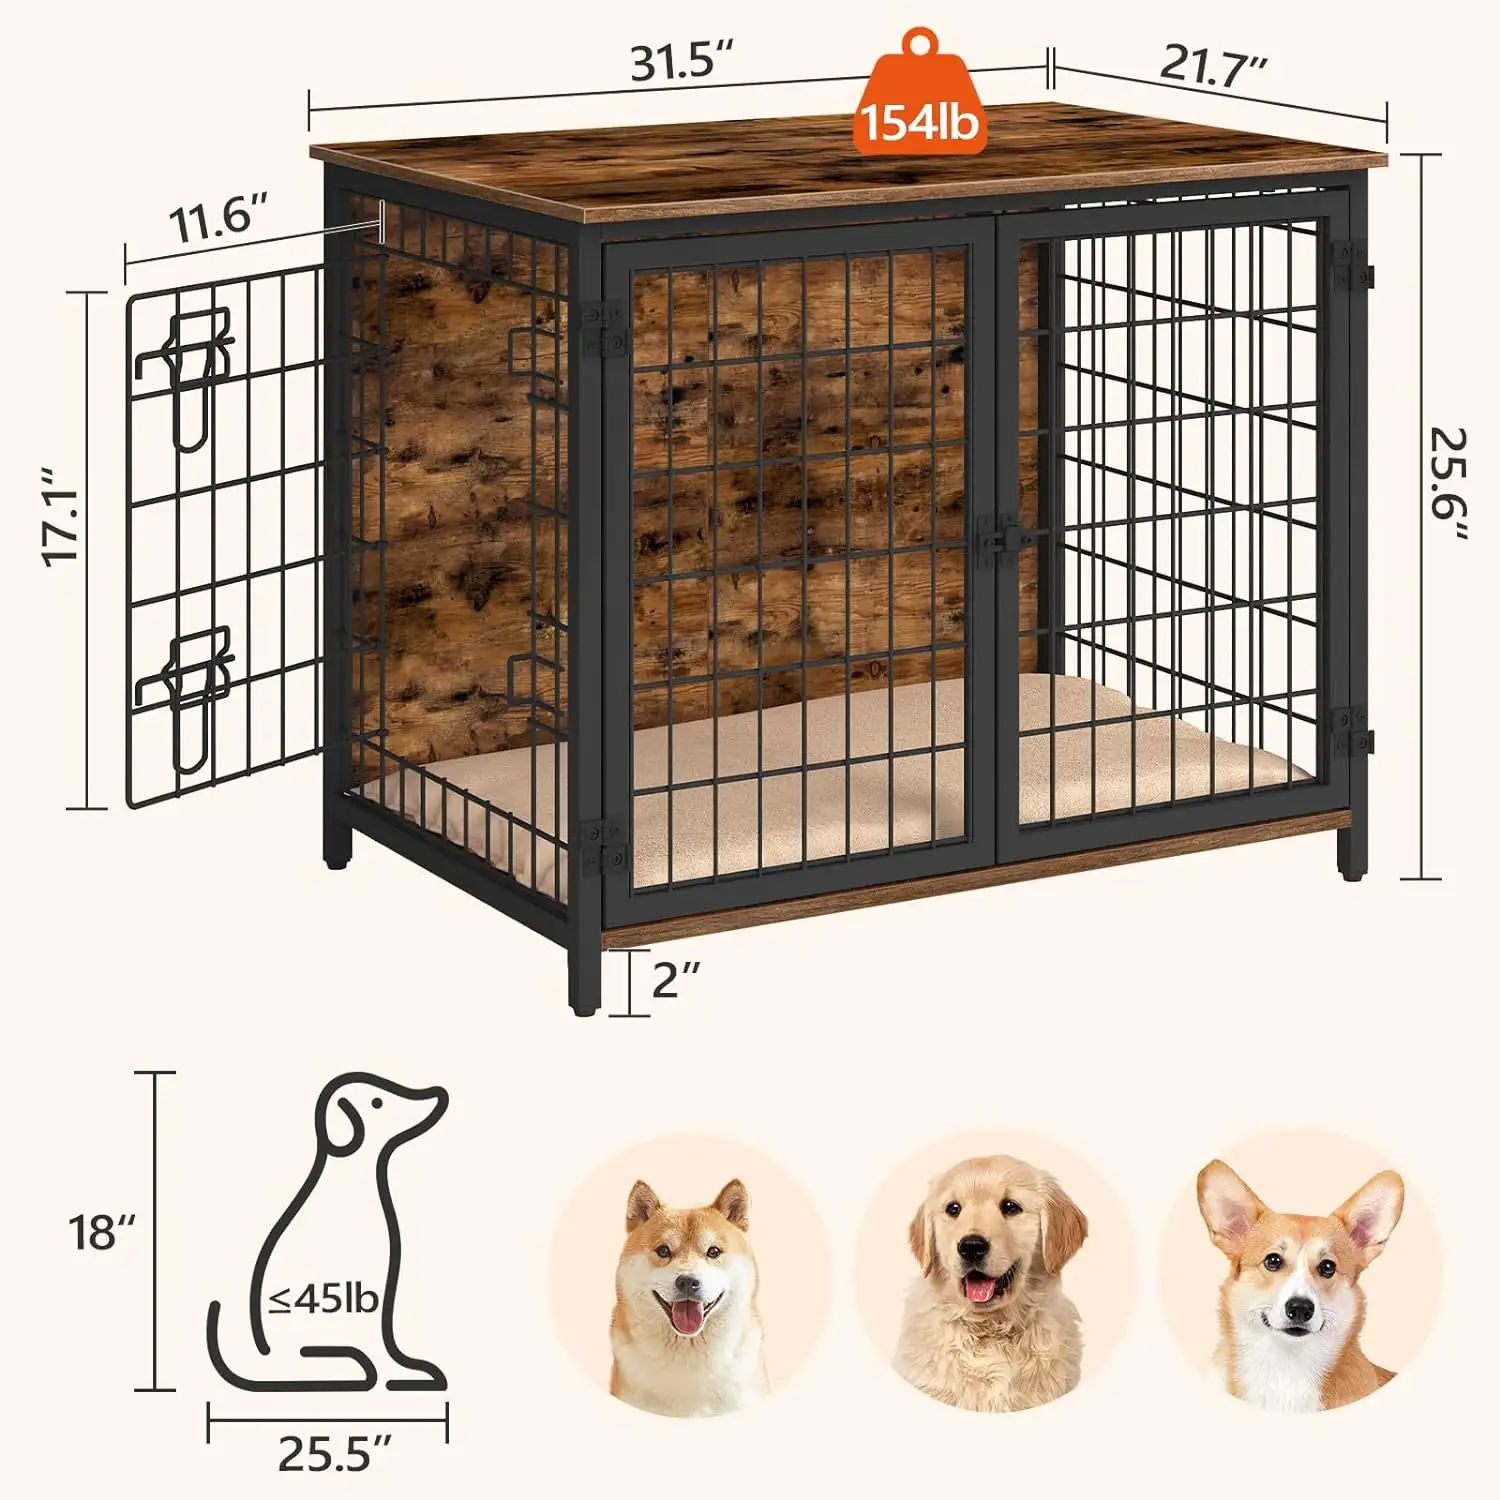 Customized Dog Crate Furniture Wooden Dog Crate Table Furniture Style Indoor Pet Crate With Double Doors Pet Cage House Product